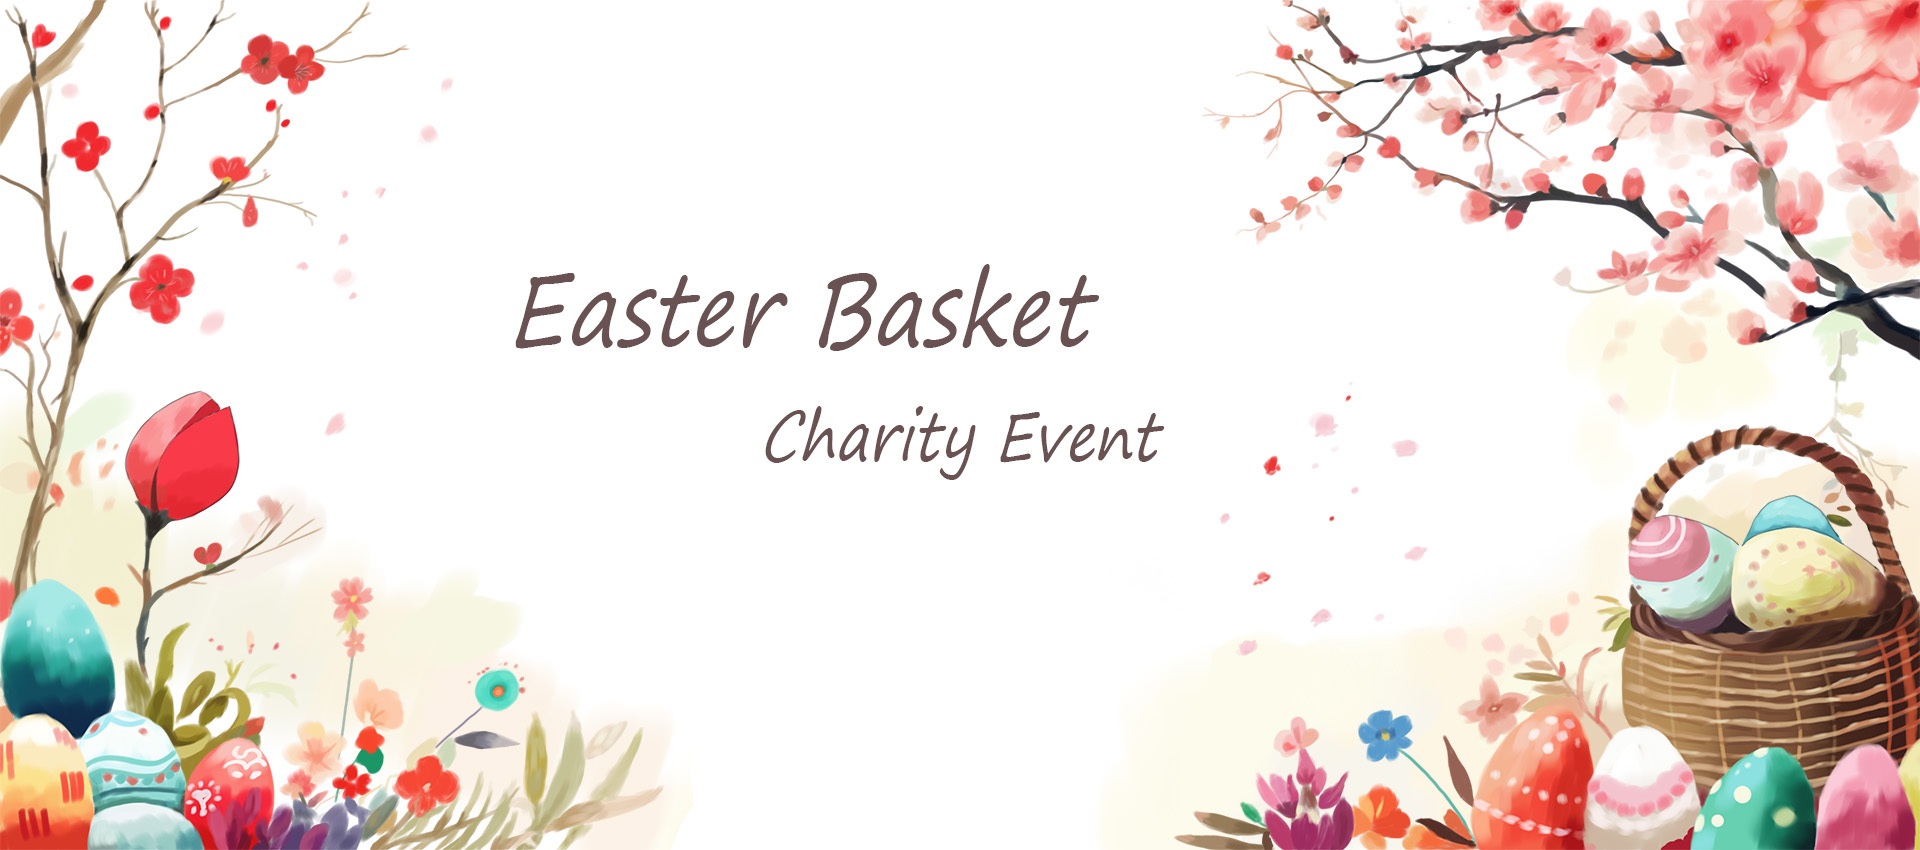 Charity Event - Easter Basket